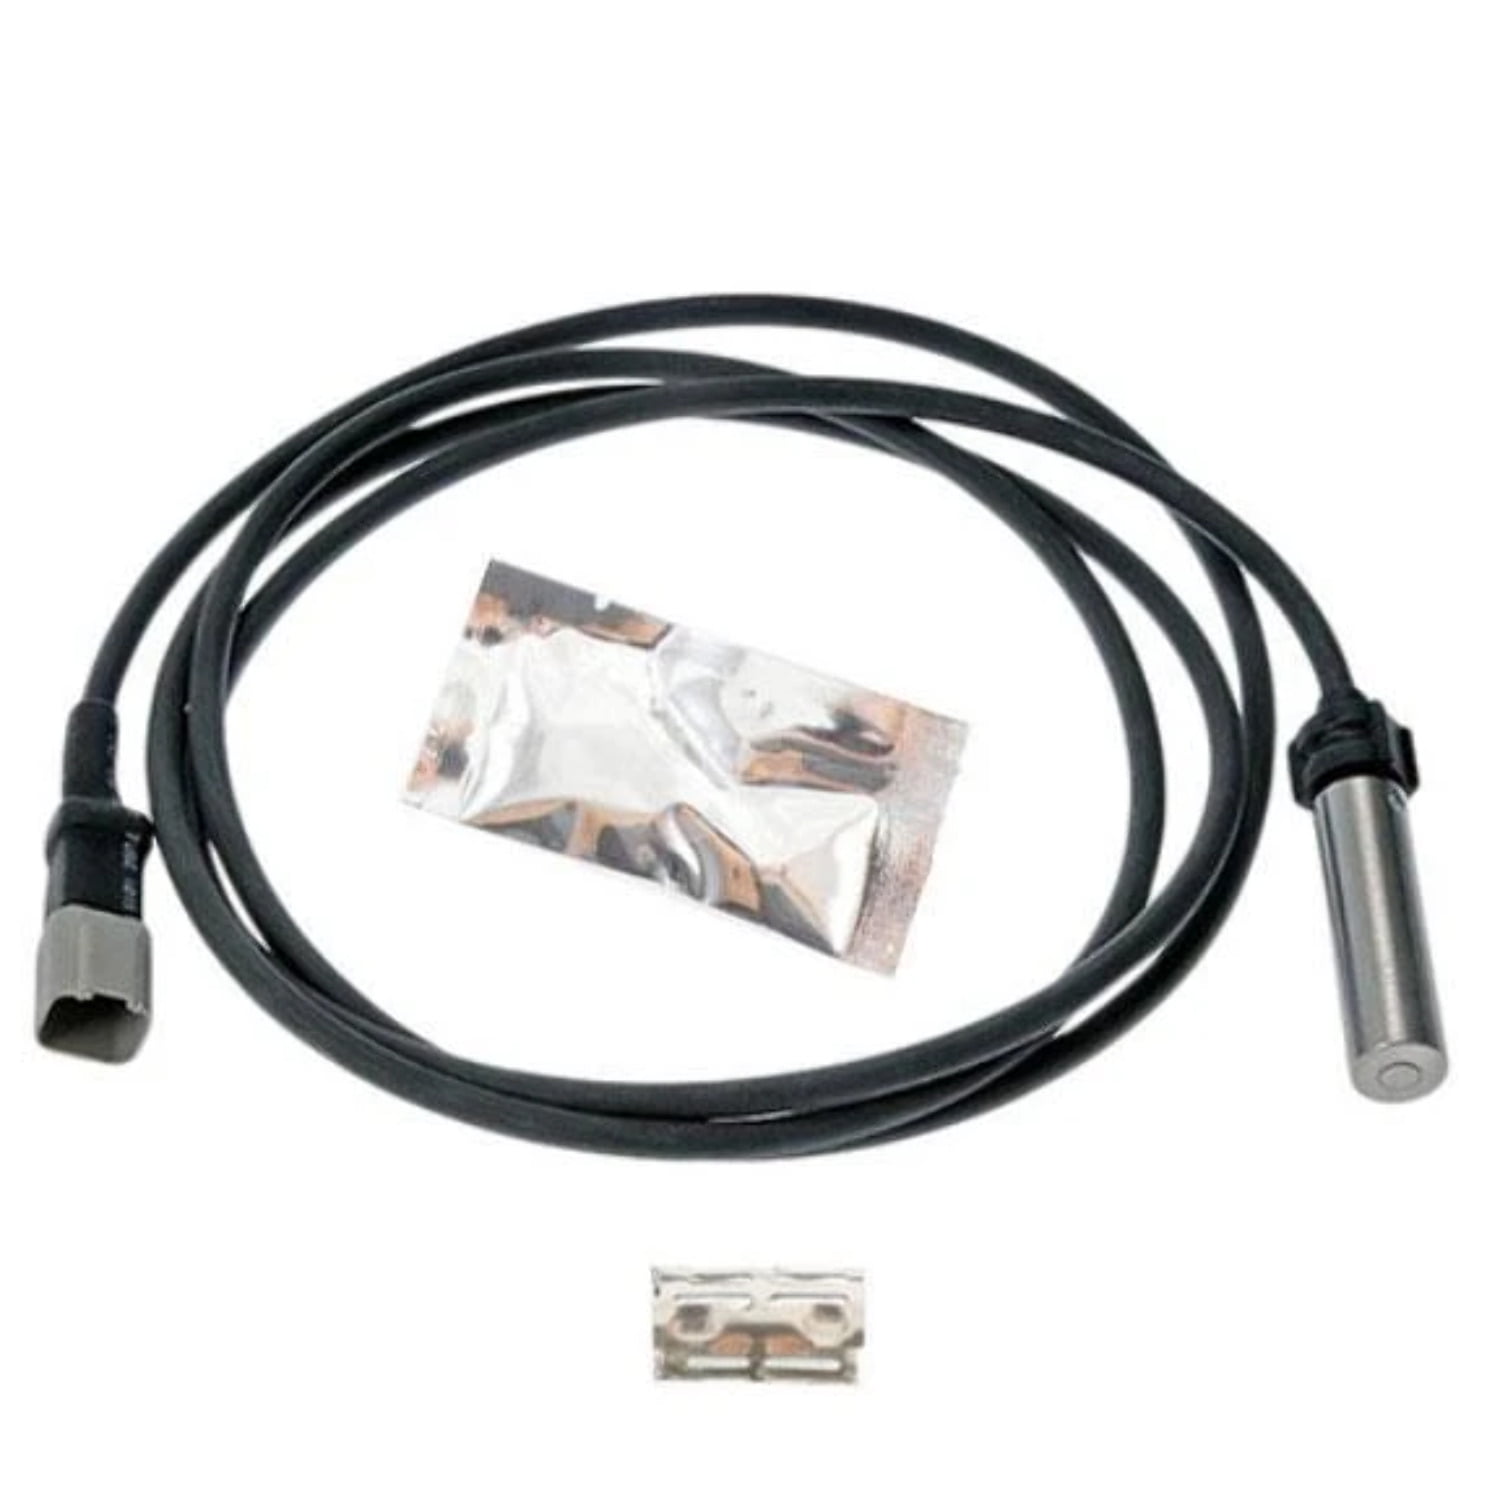 43" Length Compatible with Ford Freightline Fortpro ABS Wheel Speed Sensor Kit